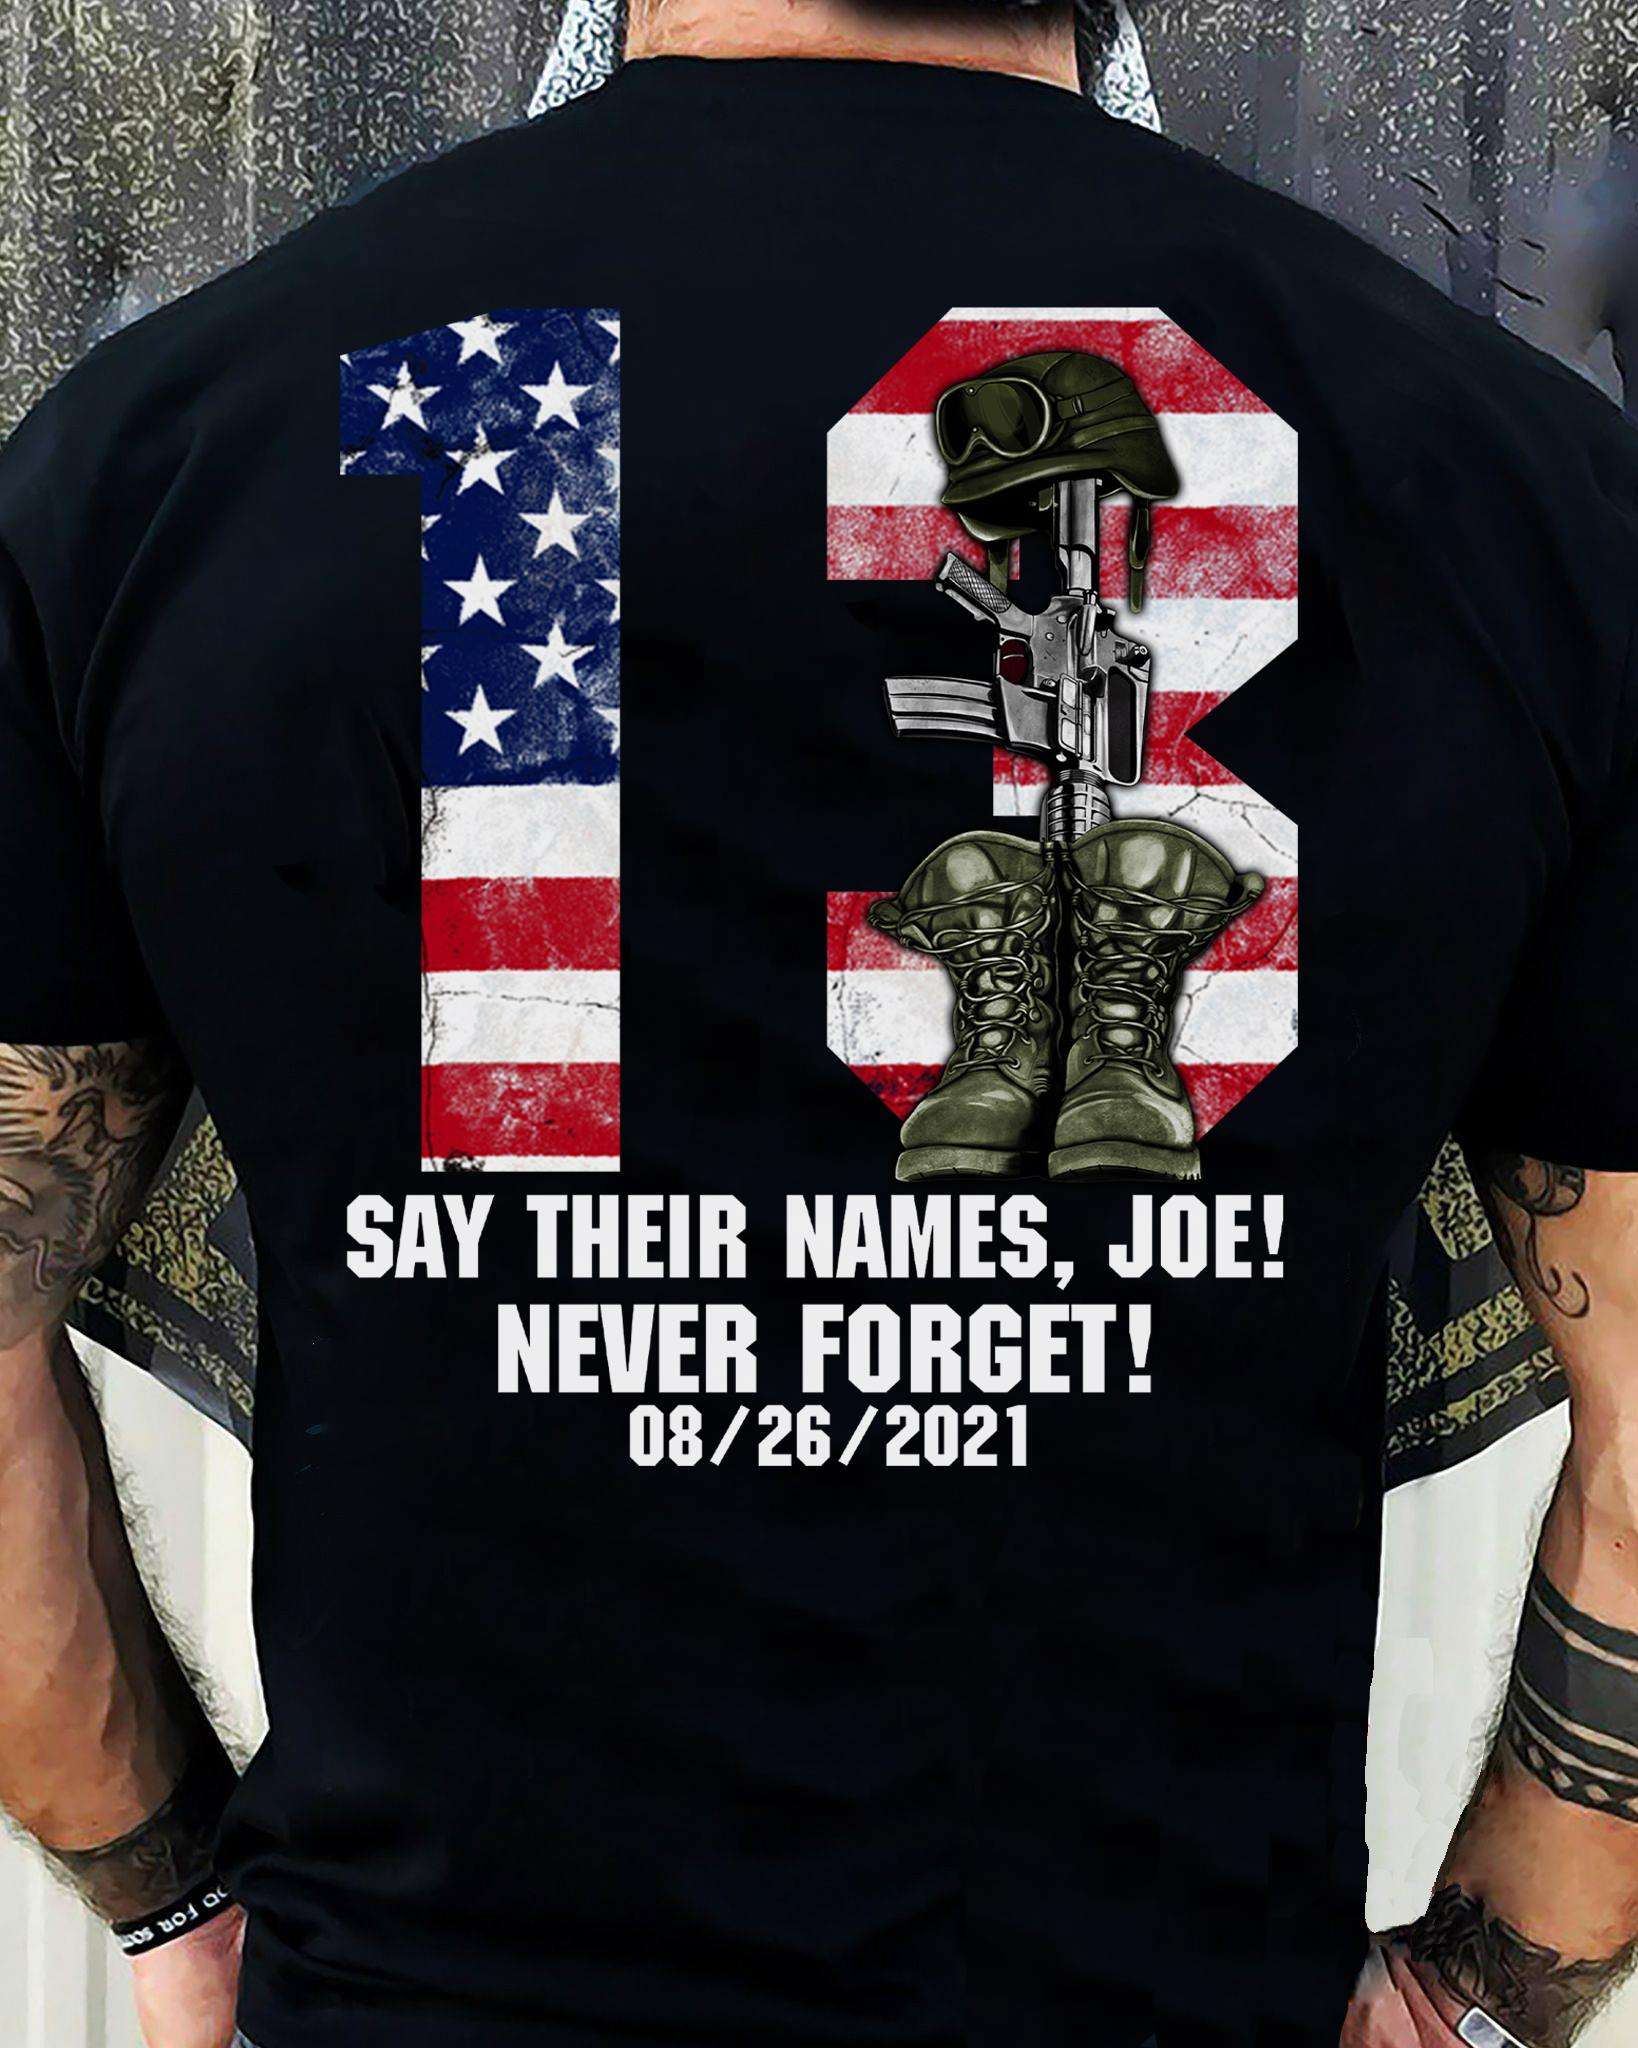 13 Hero Names Of Fallen Soldier - 13 say their names, Joe! Never forget! 08/26/2021